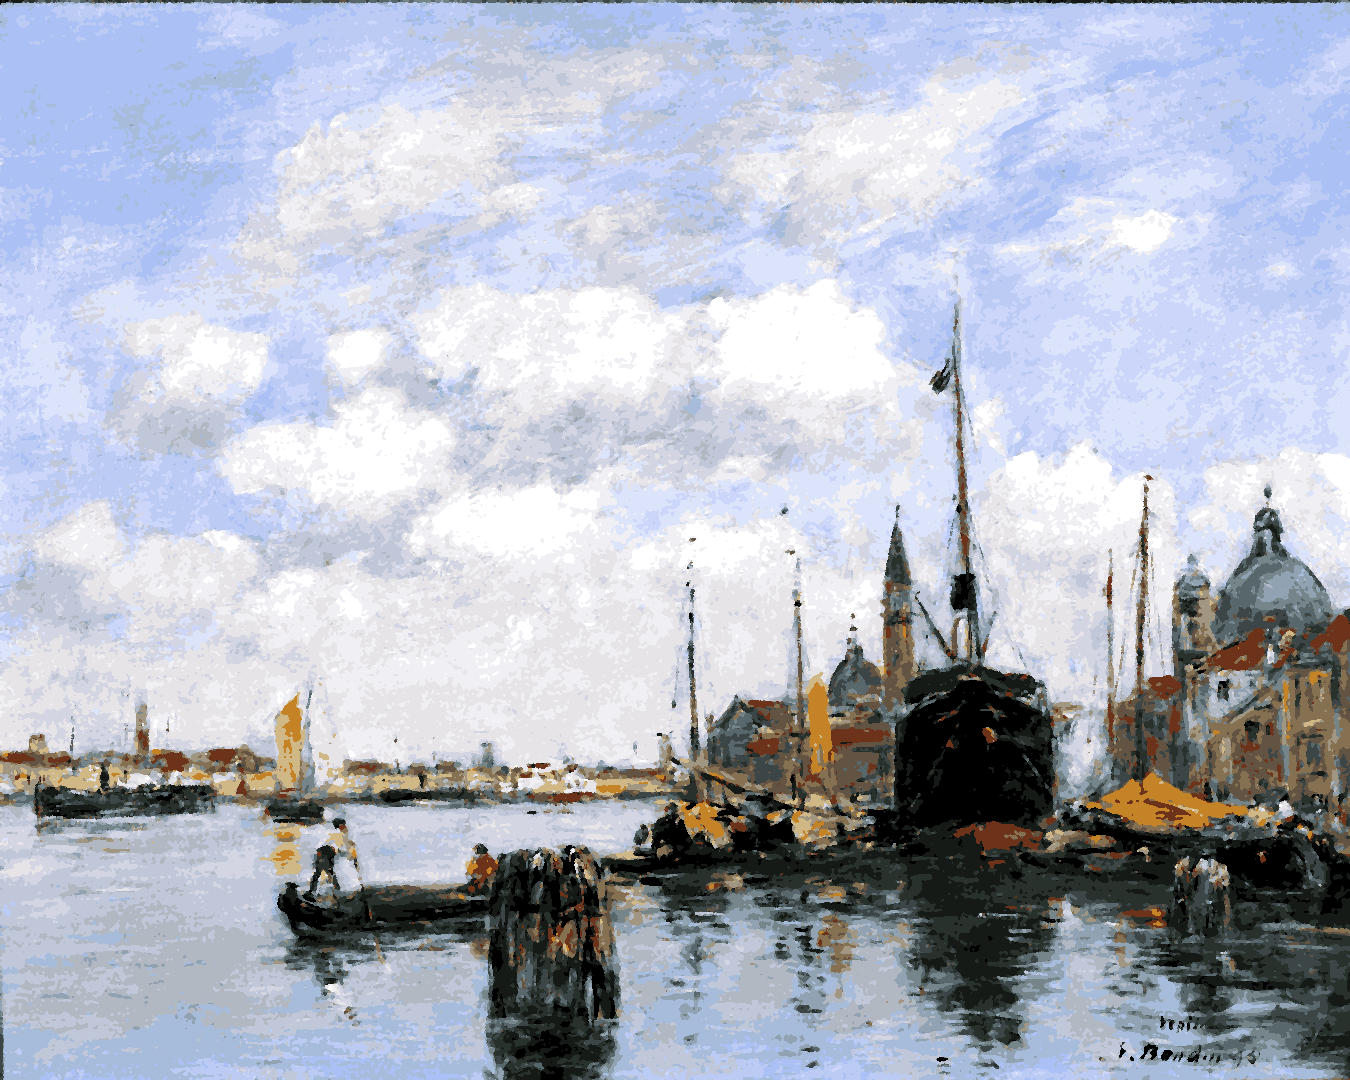 Venice, Italy Collection PD (7) - Seascape at the Giudecca by Eugène Boudin - Van-Go Paint-By-Number Kit